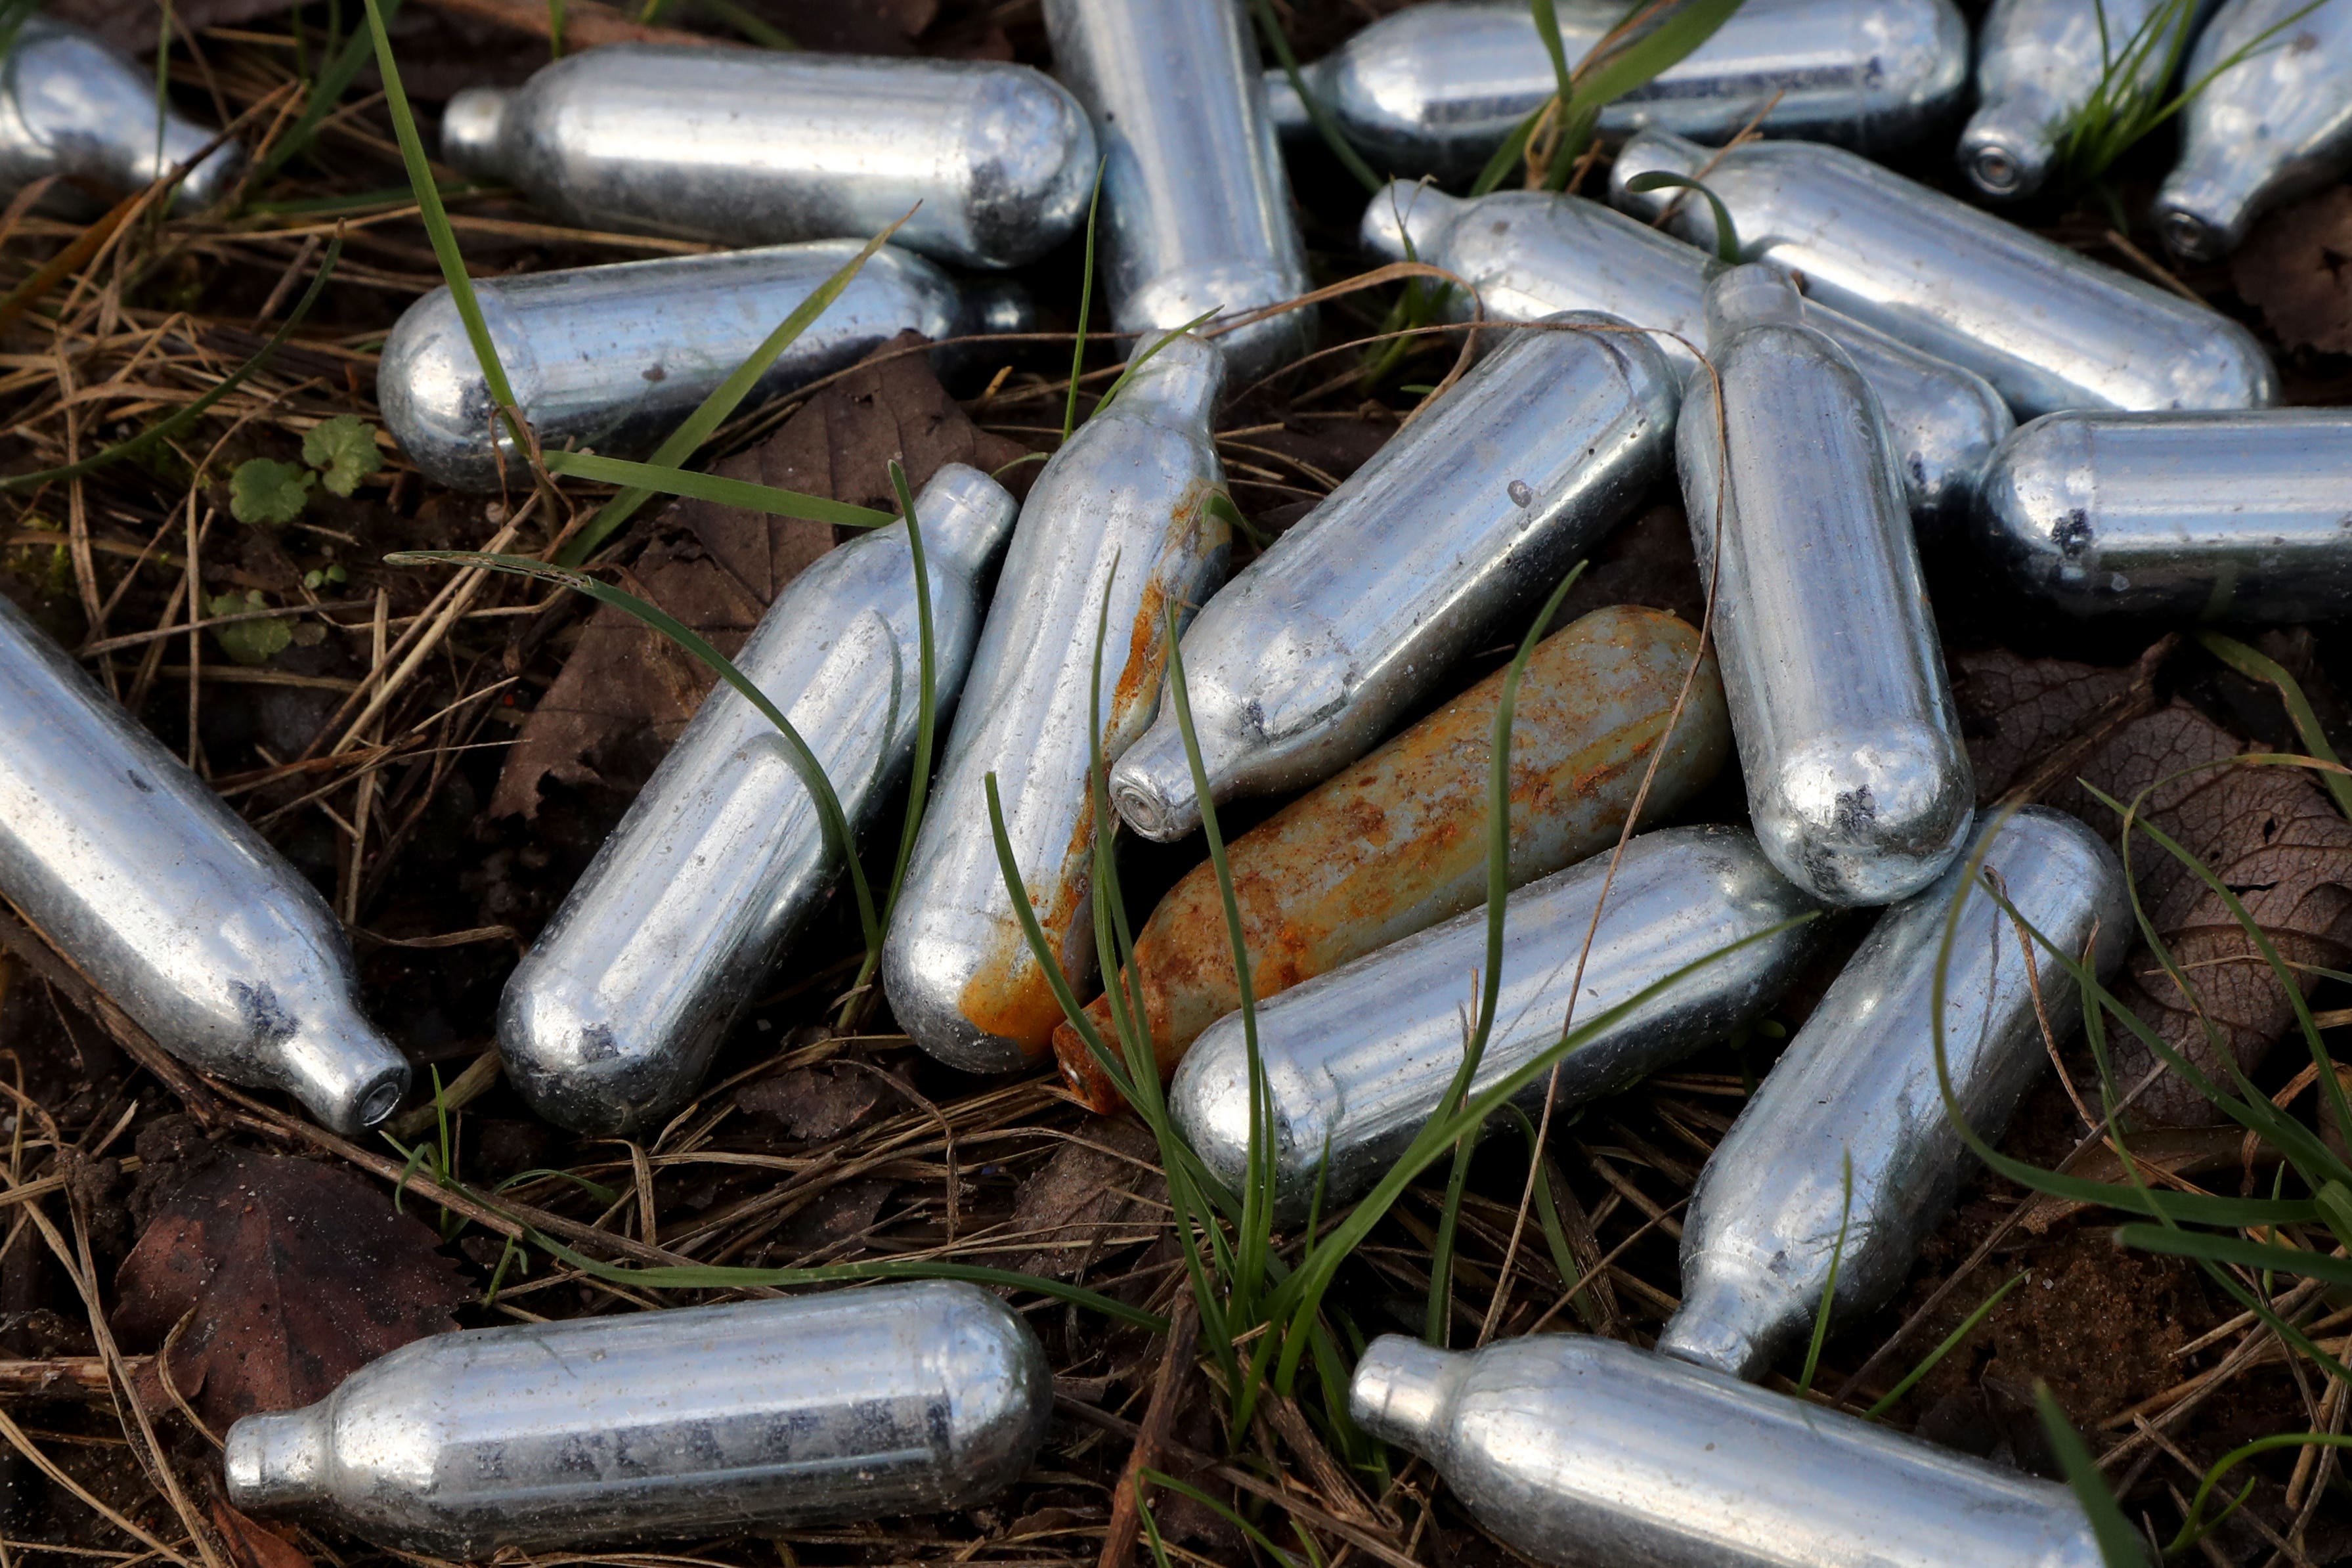 File photo: Laughing gas cannisters strewn on the ground